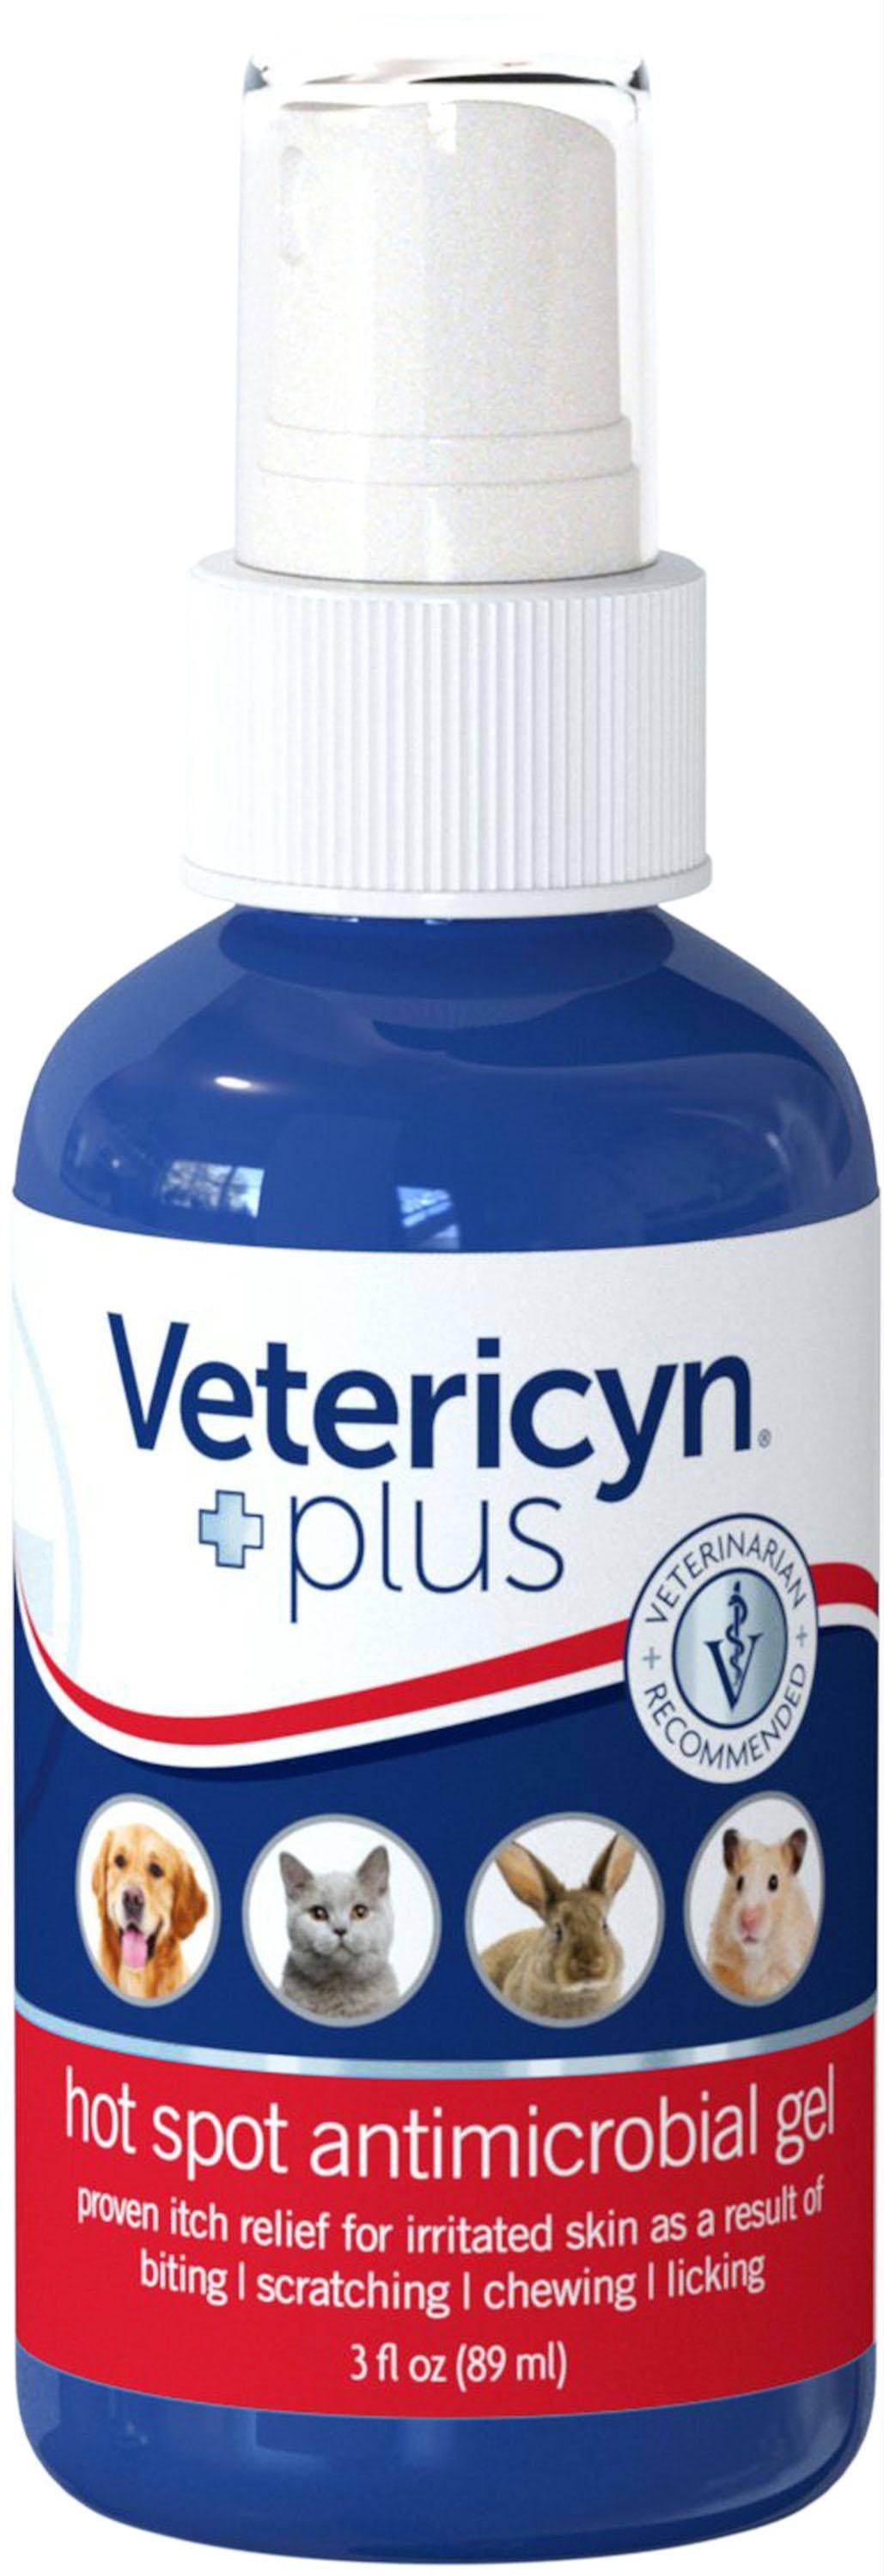 Vetericyn Plus Hot Spot Antimicrobial Gel for Dogs